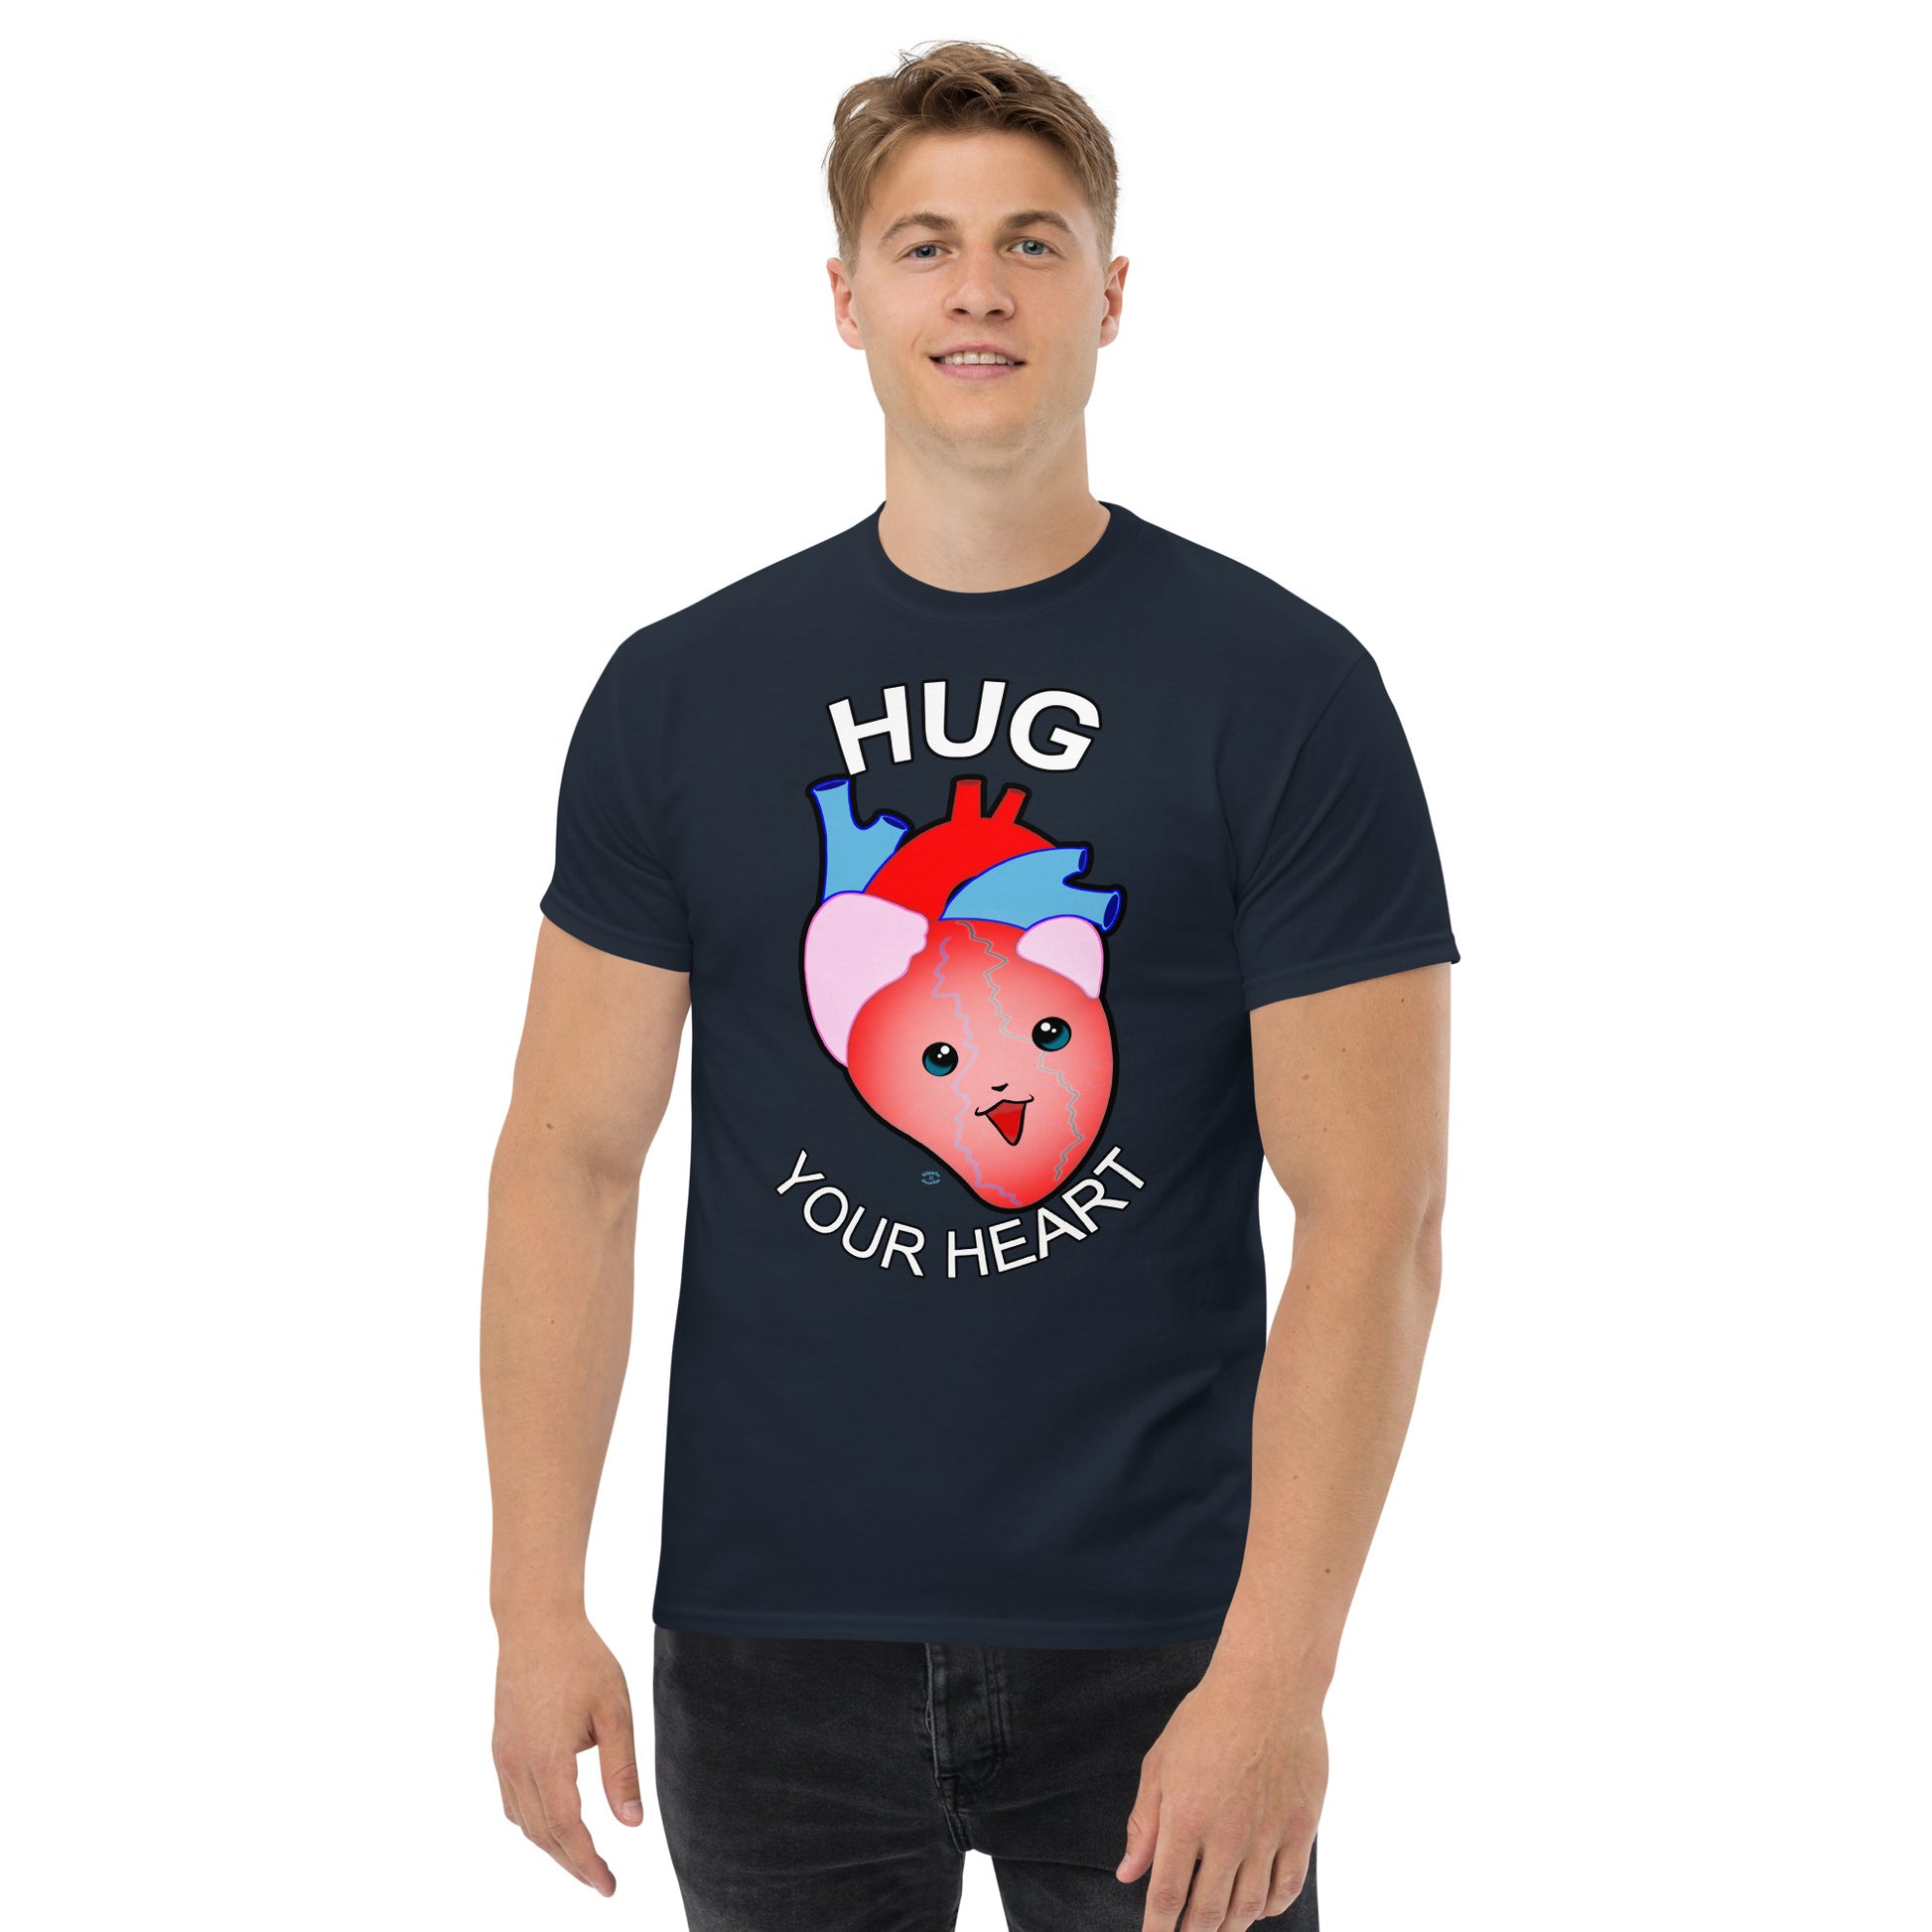 A Picture of a man wearing a short sleeved tshirt with a picture on the front of a smiling heart with the text "HUG Your Heart" - color navy blue